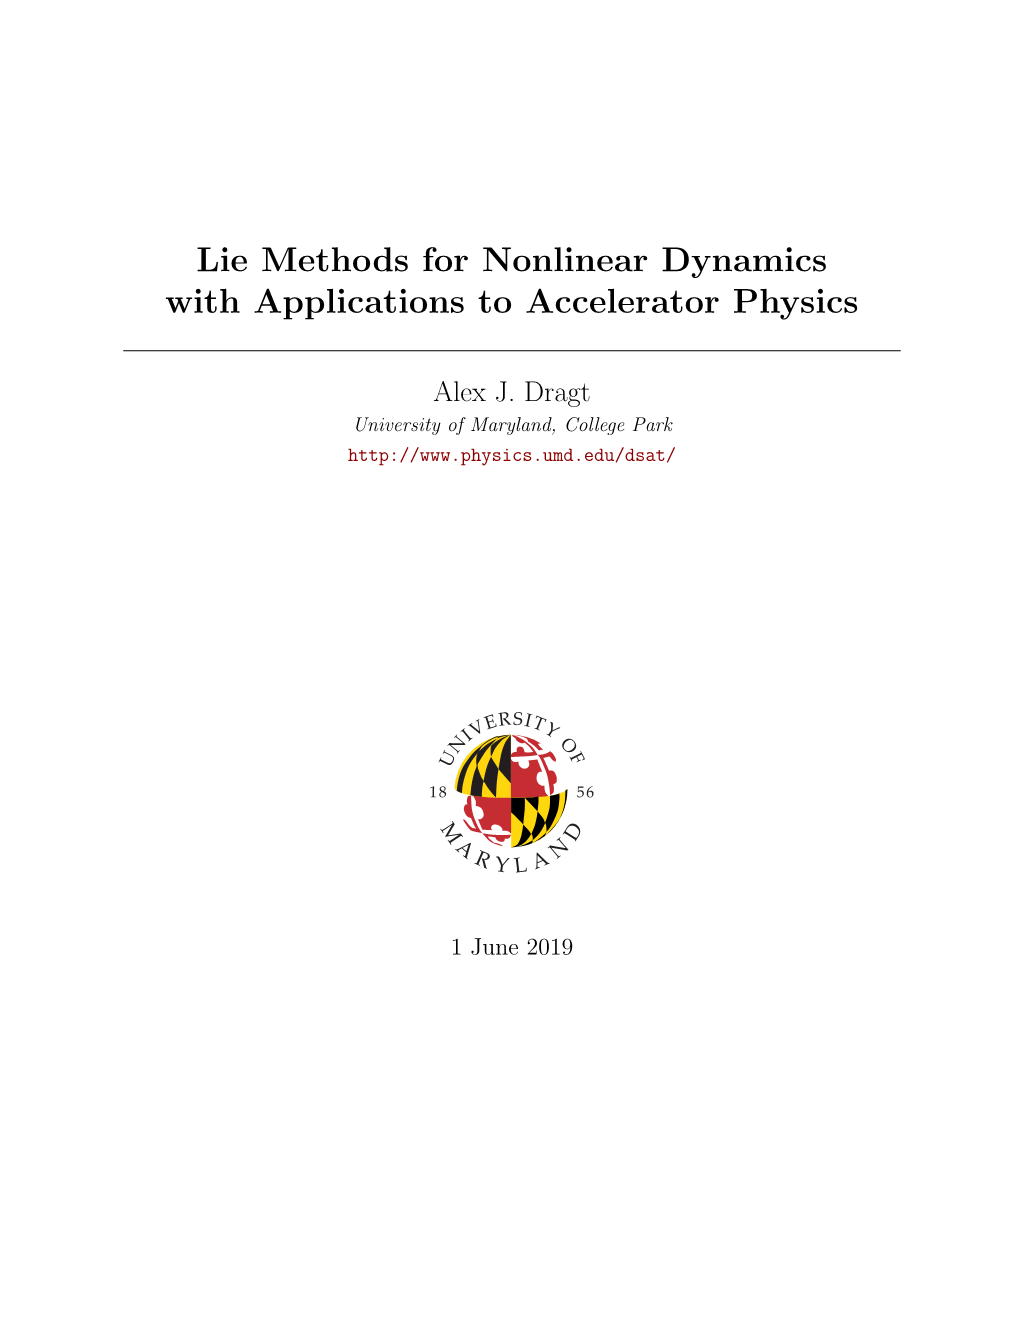 Lie Methods for Nonlinear Dynamics with Applications to Accelerator Physics